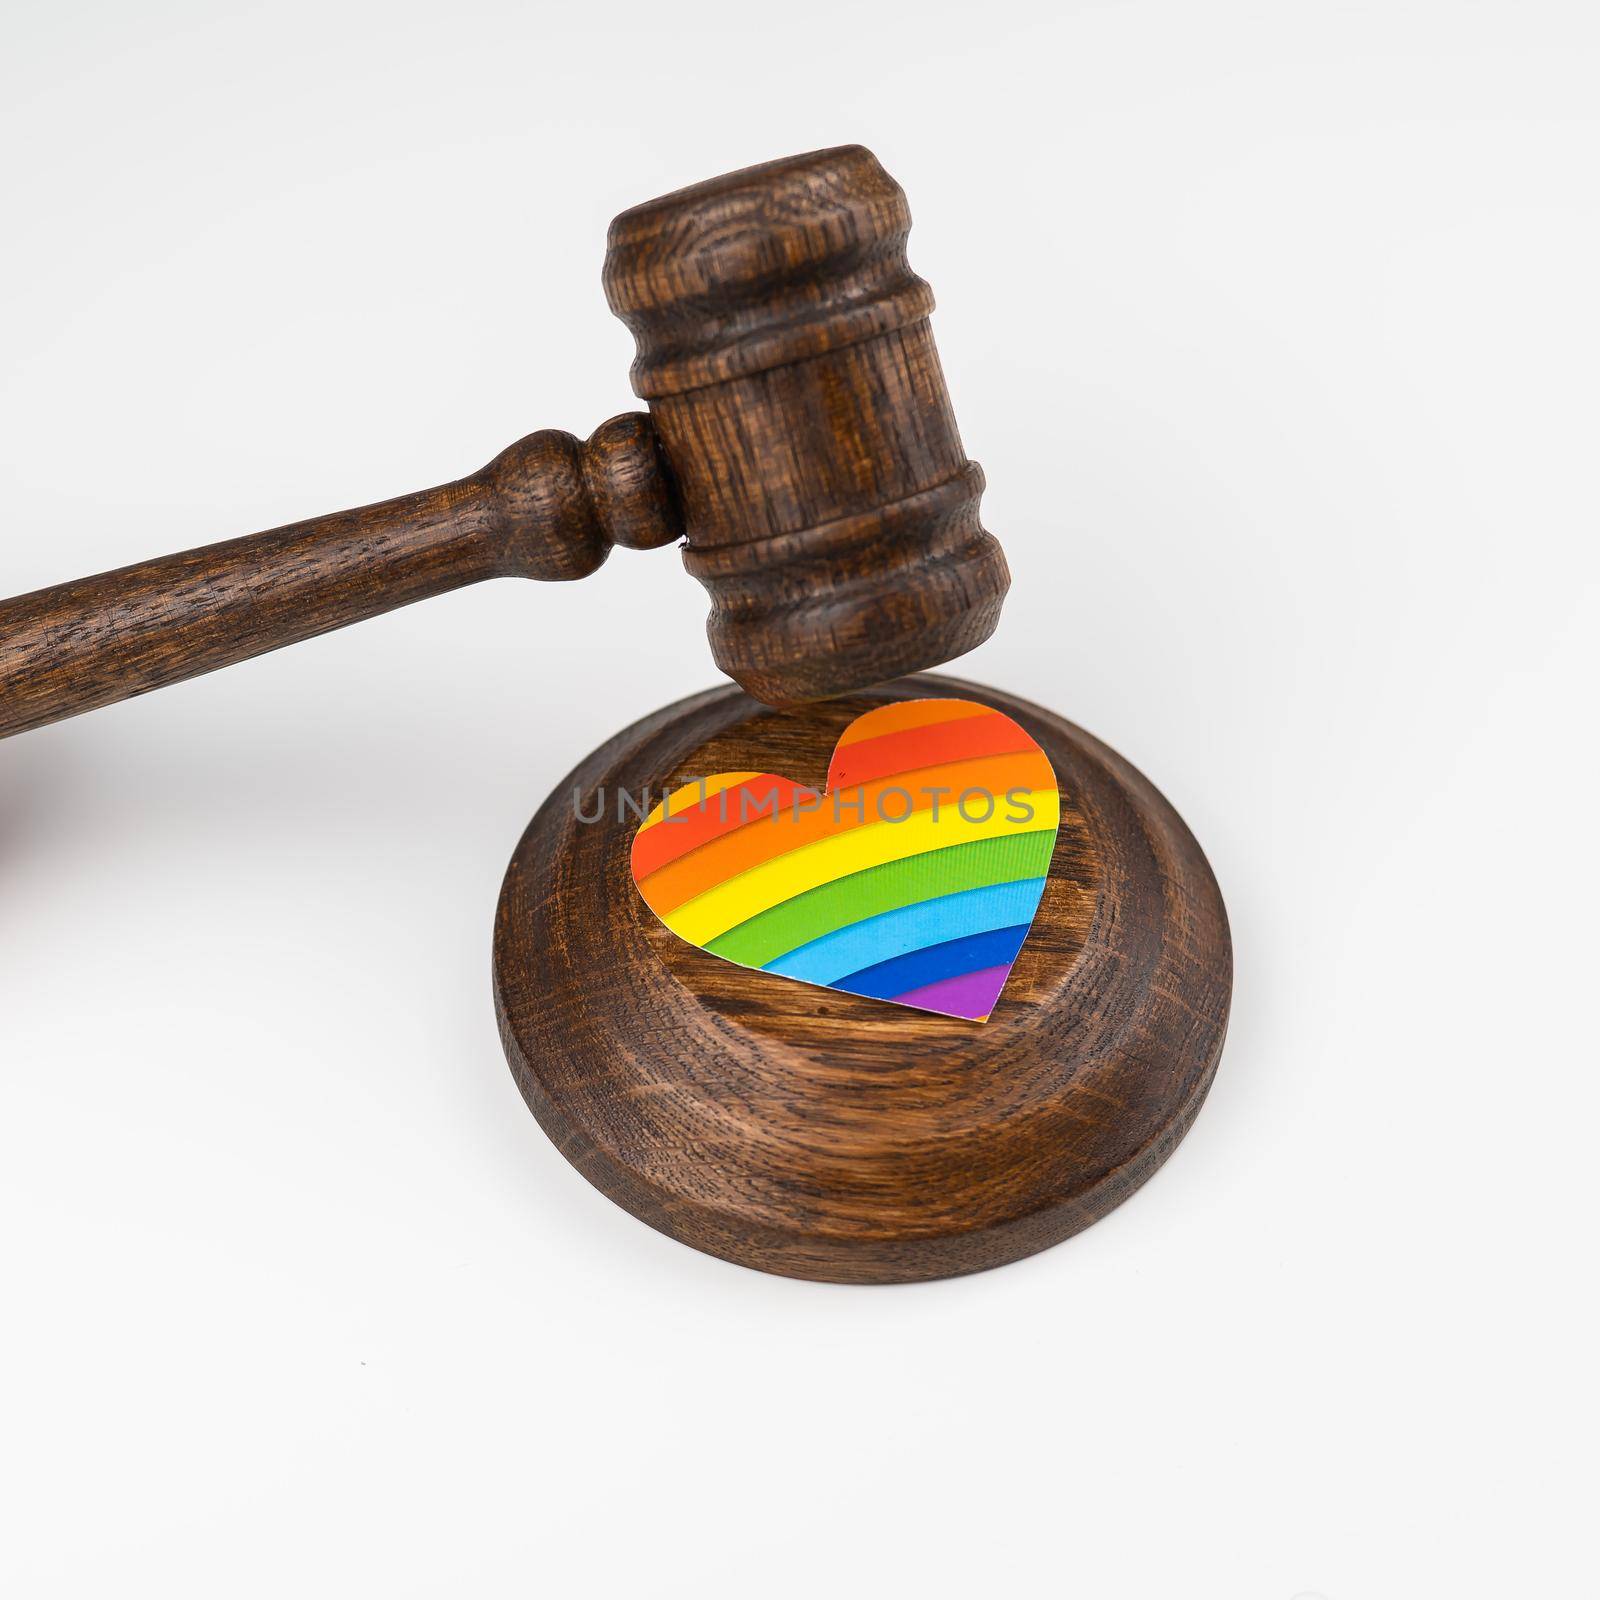 The judge hits a heart with a rainbow flag with a gavel